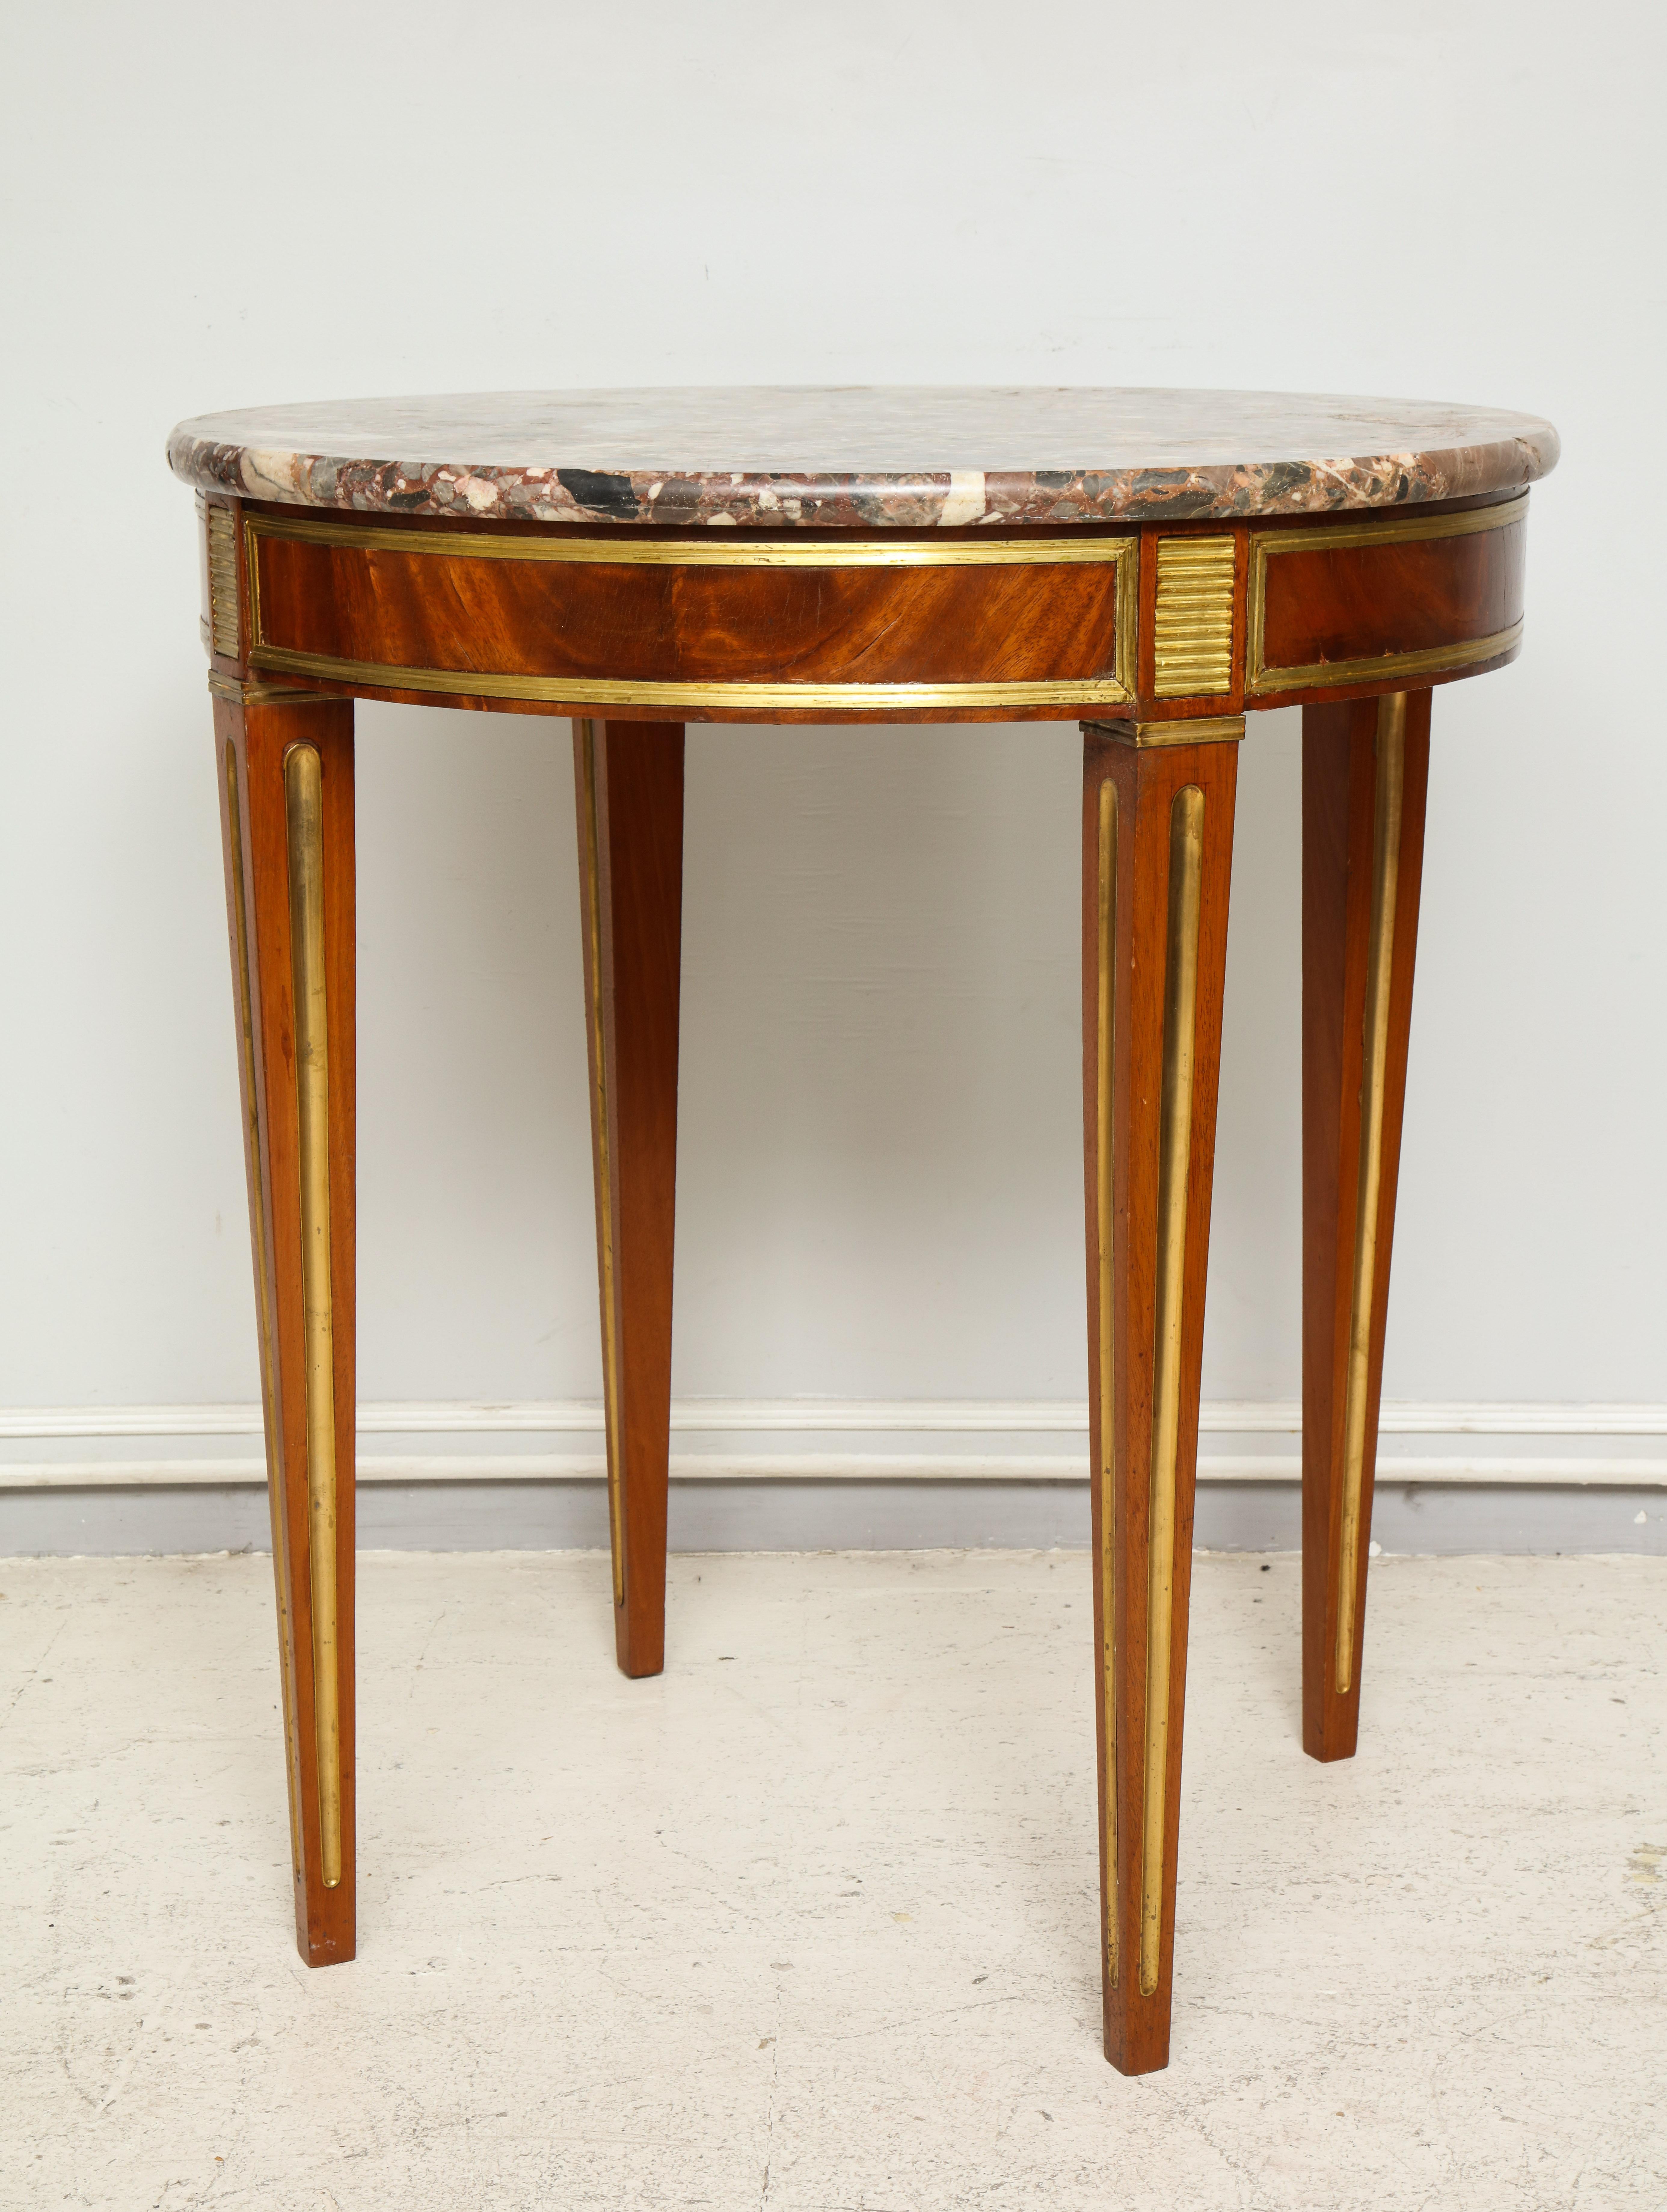 Brass inlaid marble-top table in the neoclassic manner.